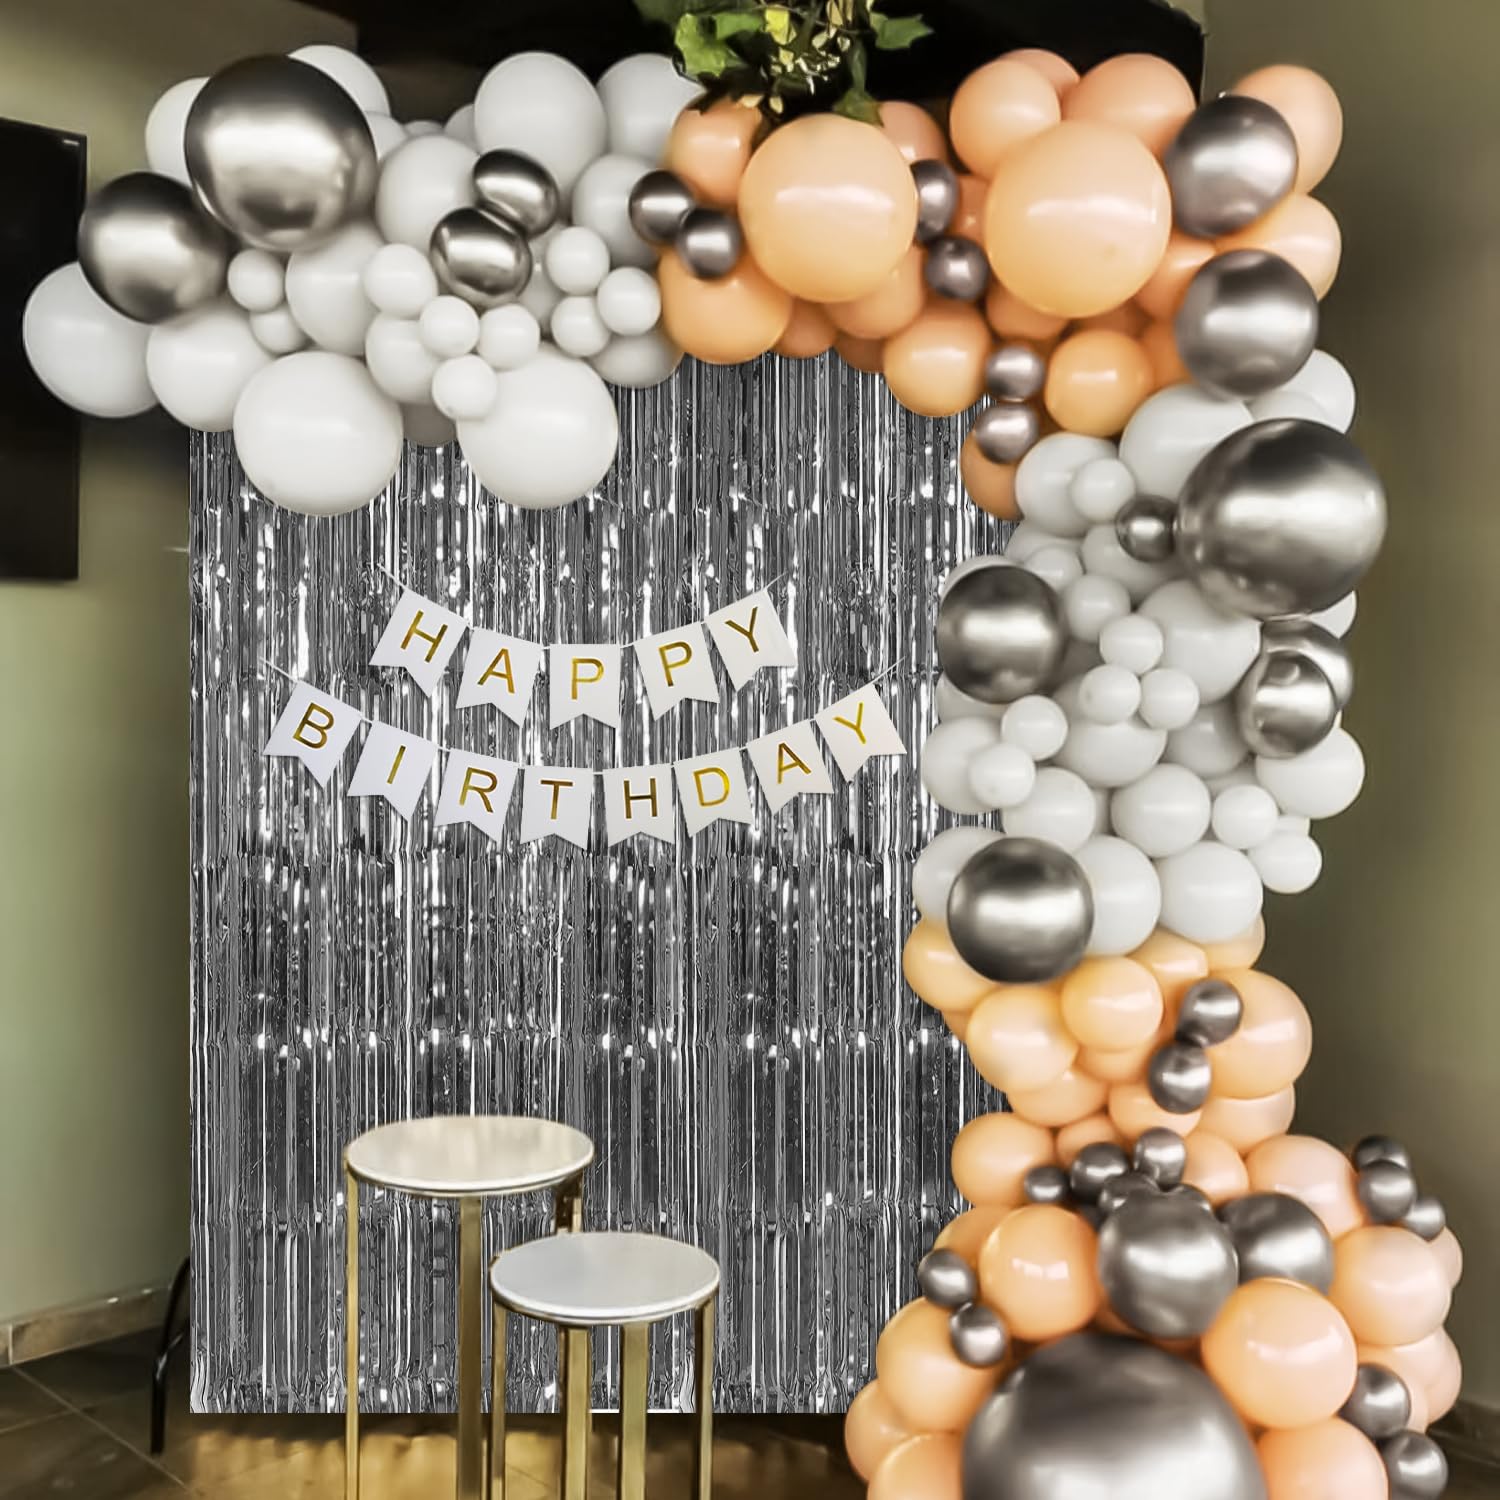 Birthday Decoration Items & DIY Kits for decorating your home